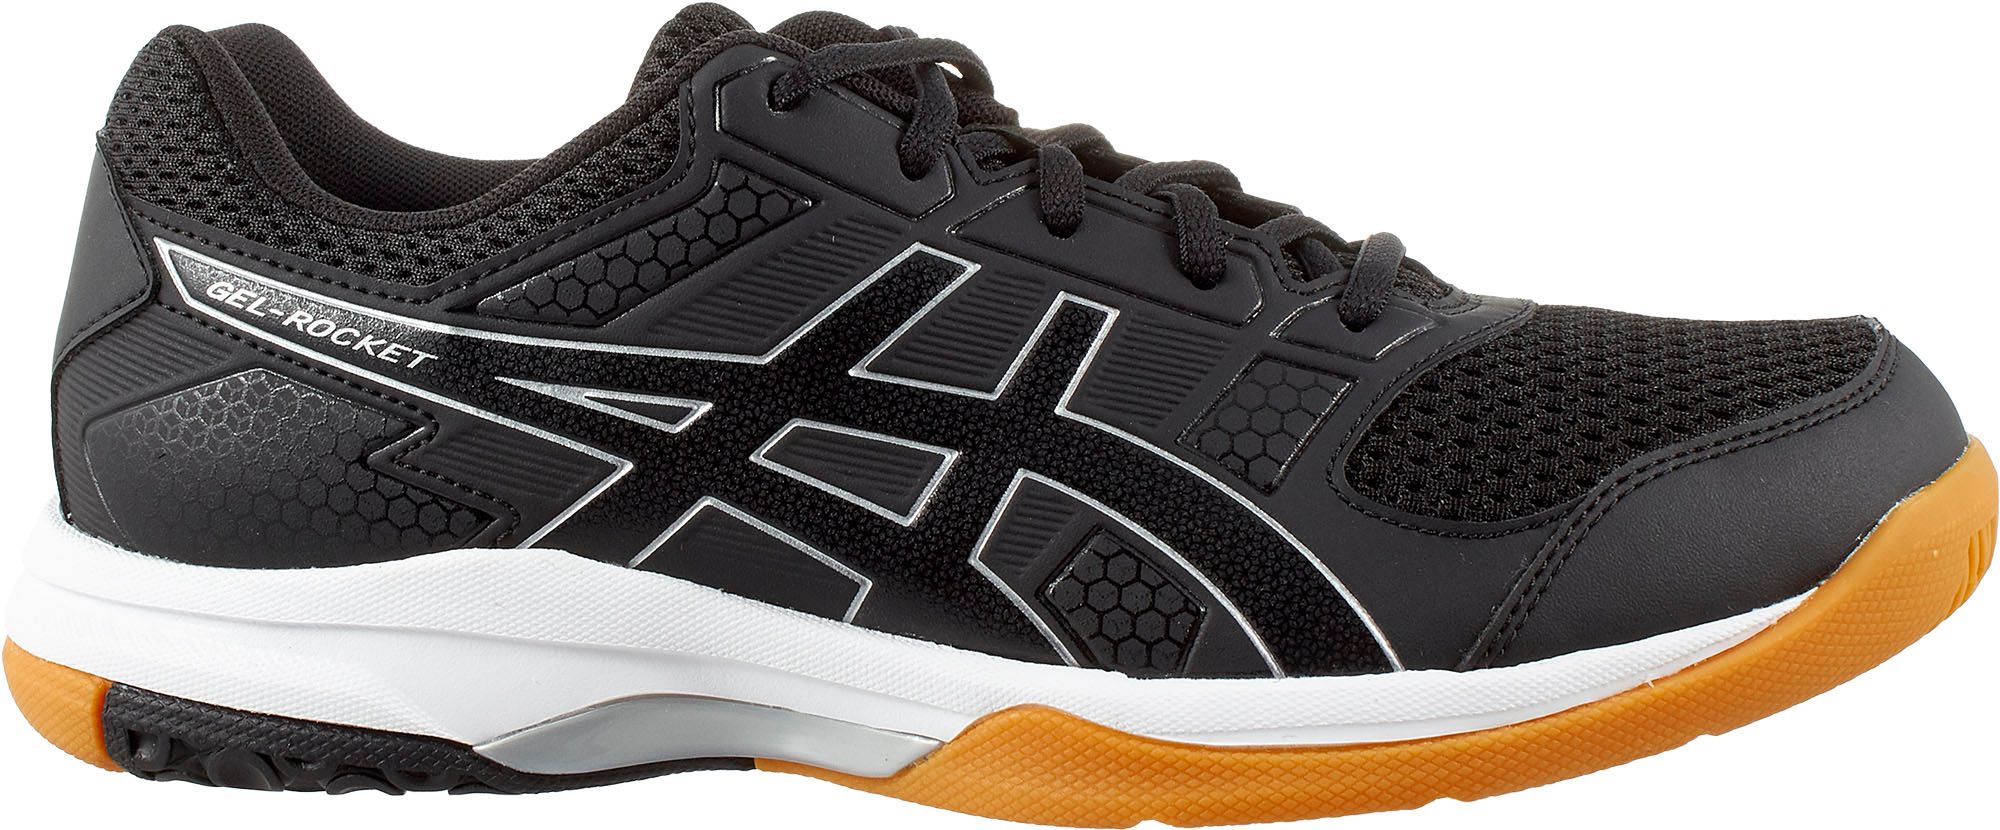 Volleyball Shoes | DICK'S Sporting Goods